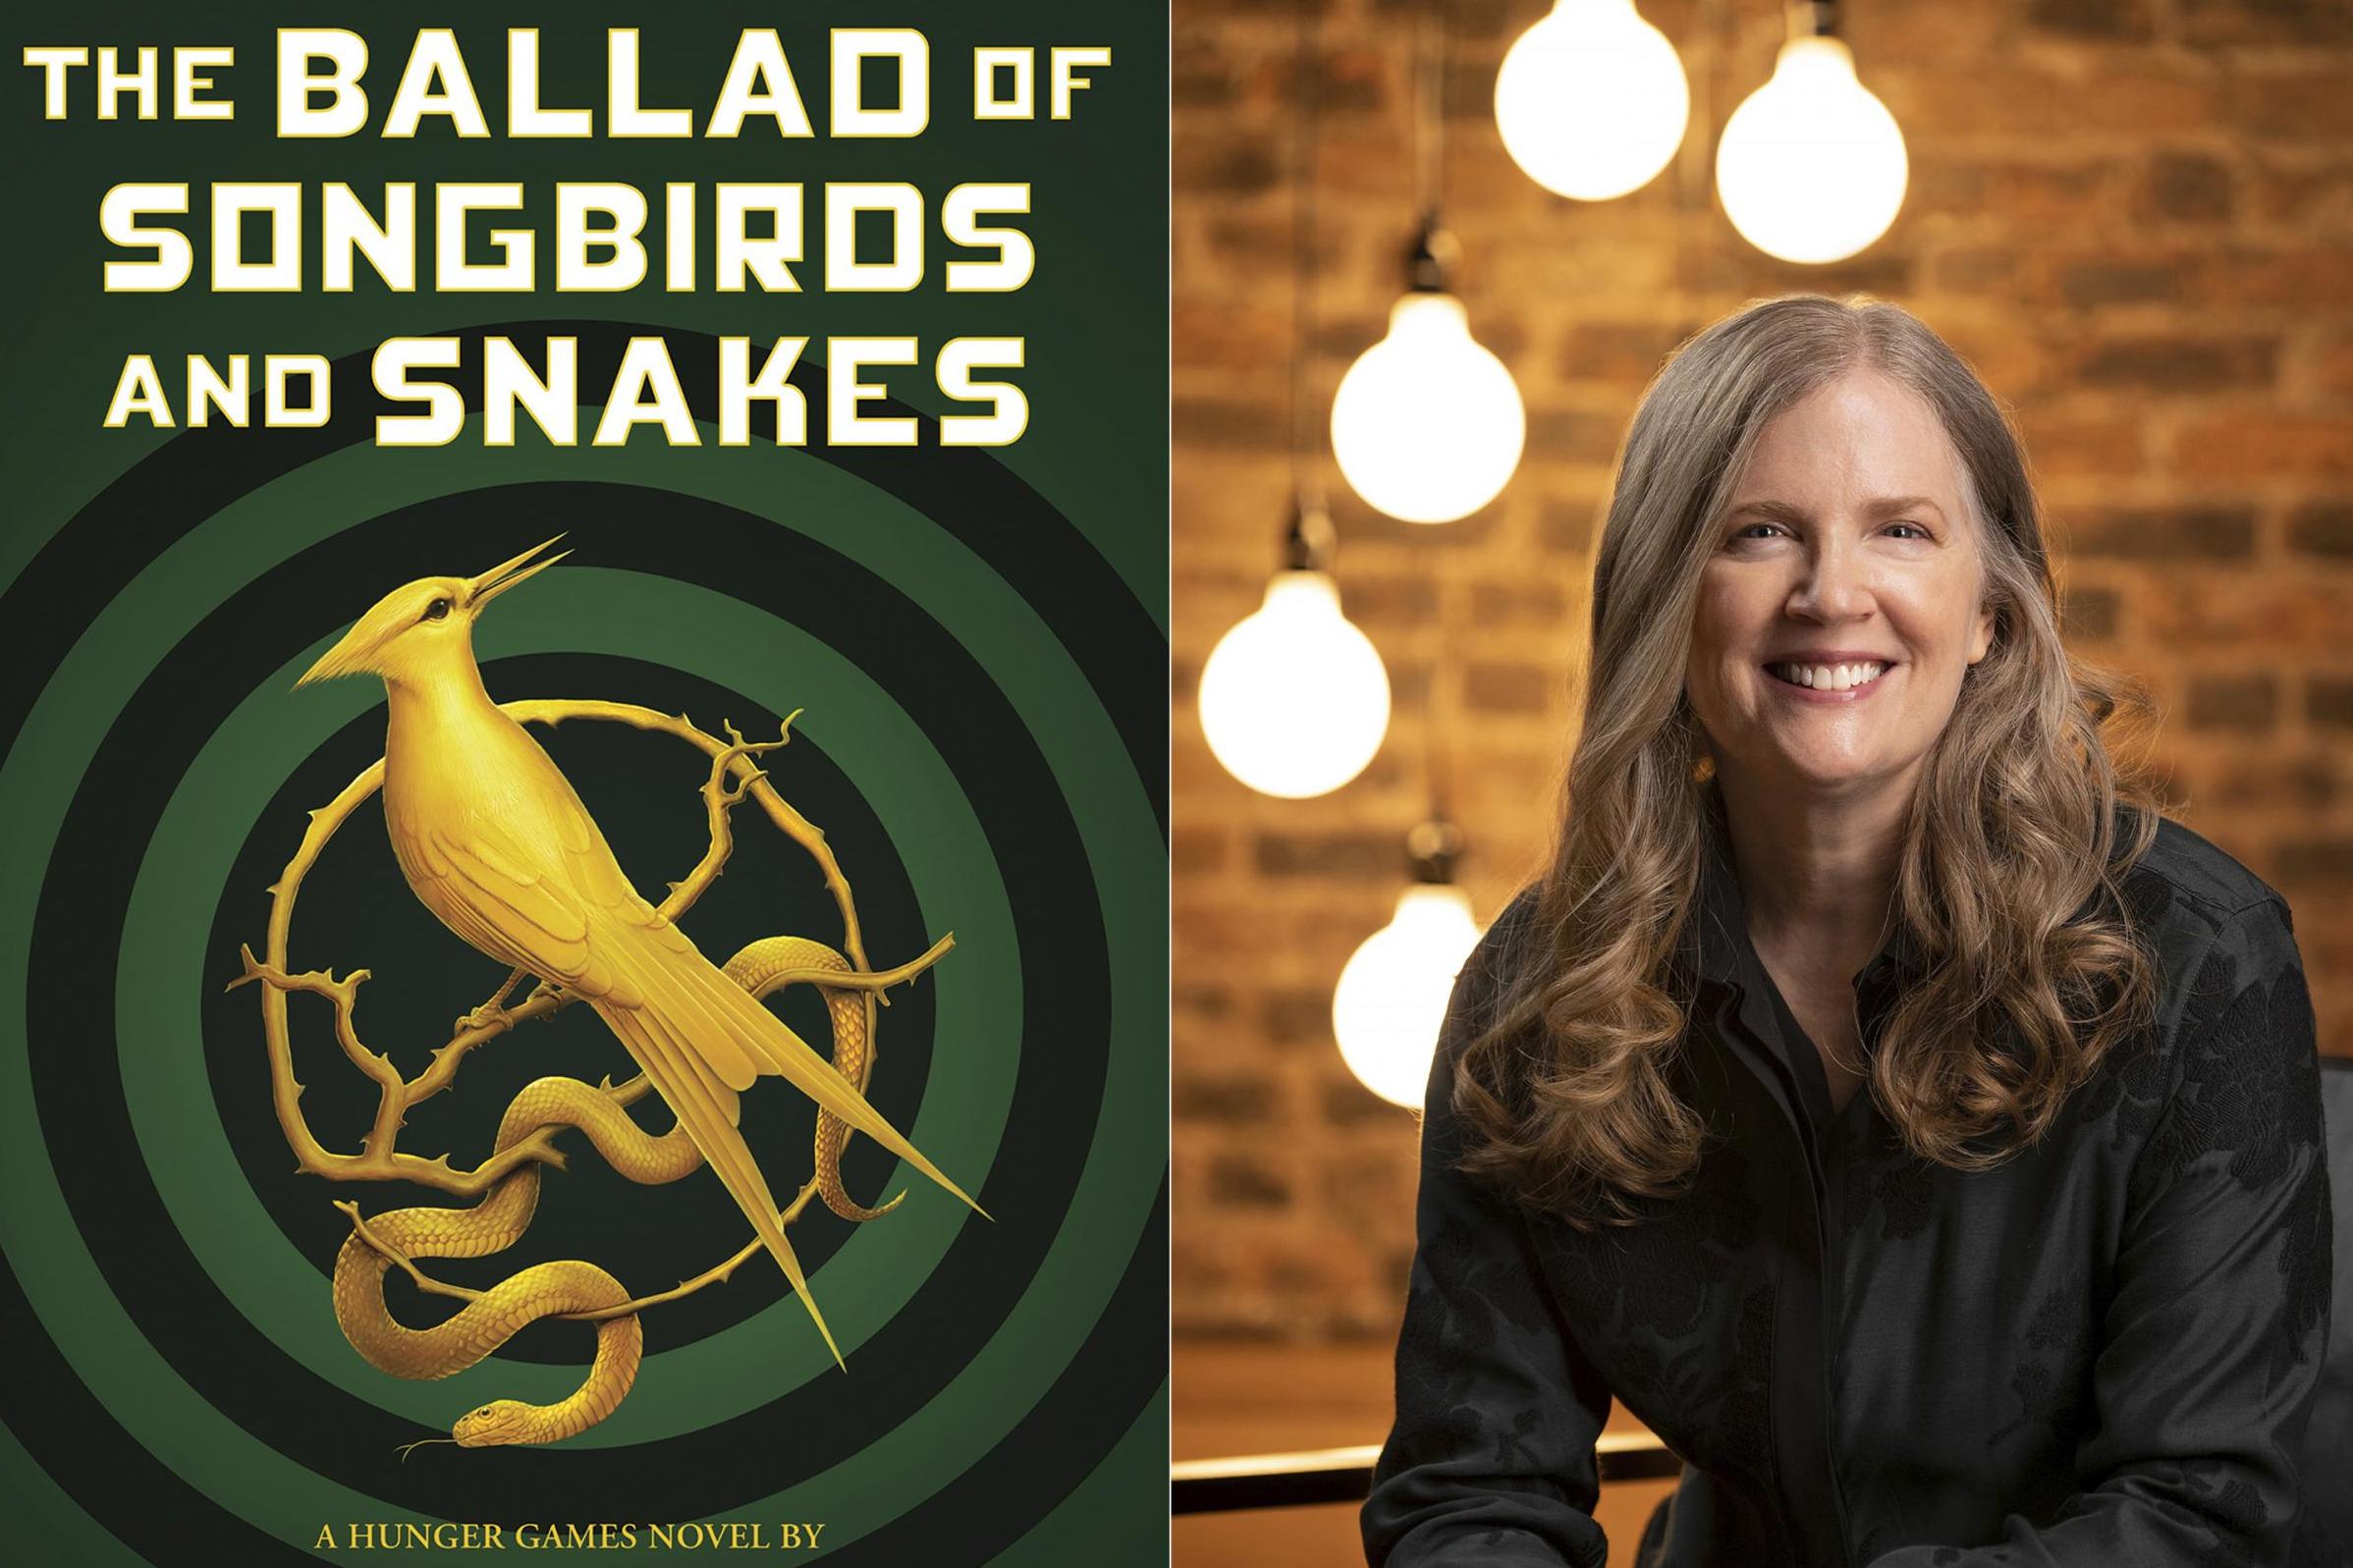 The Hunger Games' Returns With the New Prequel, The Ballad of Songbirds &  Snakes